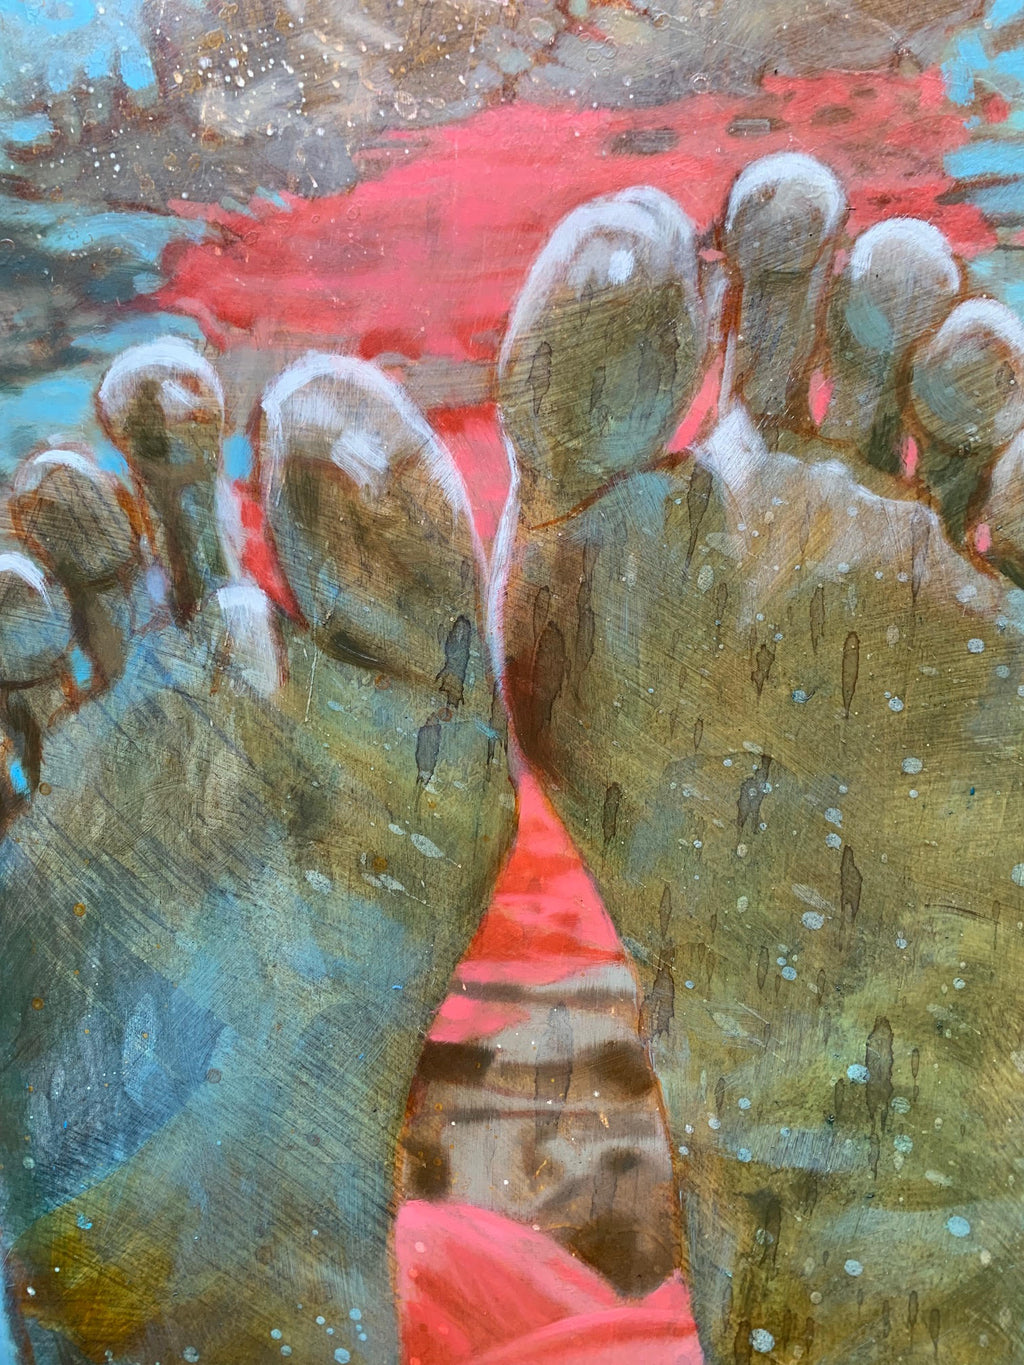 Oil painting by Carol Bennett of swimmer wearing pink bathing suit's feet with water reflection detail